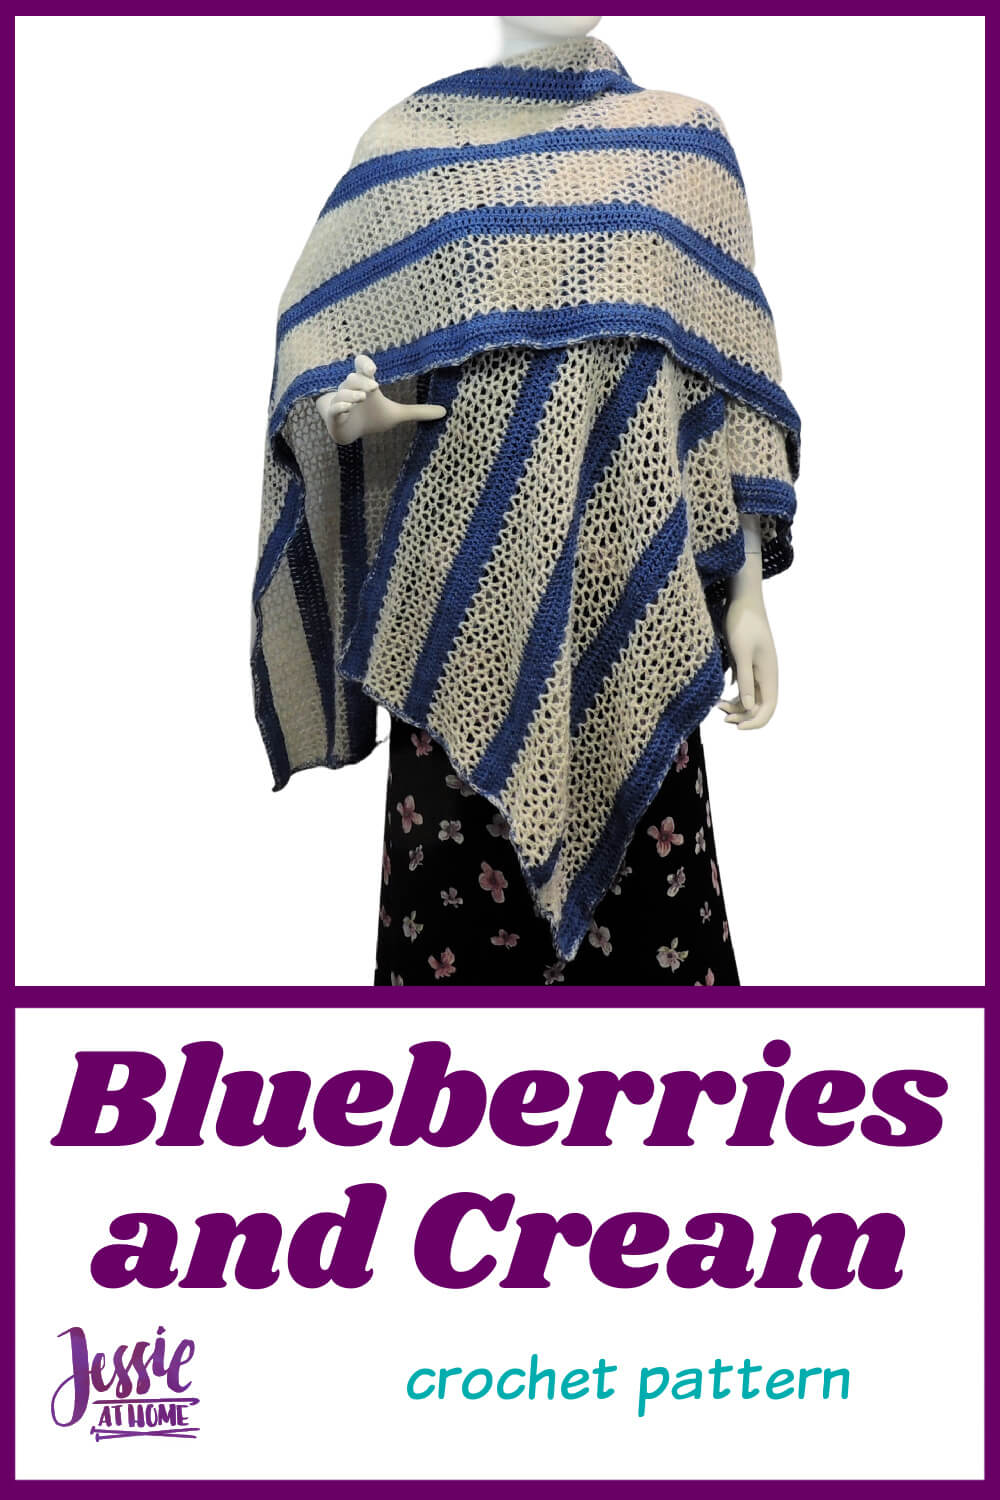 Blueberries and Cream - free crochet pattern for a fabulous ruana wrap